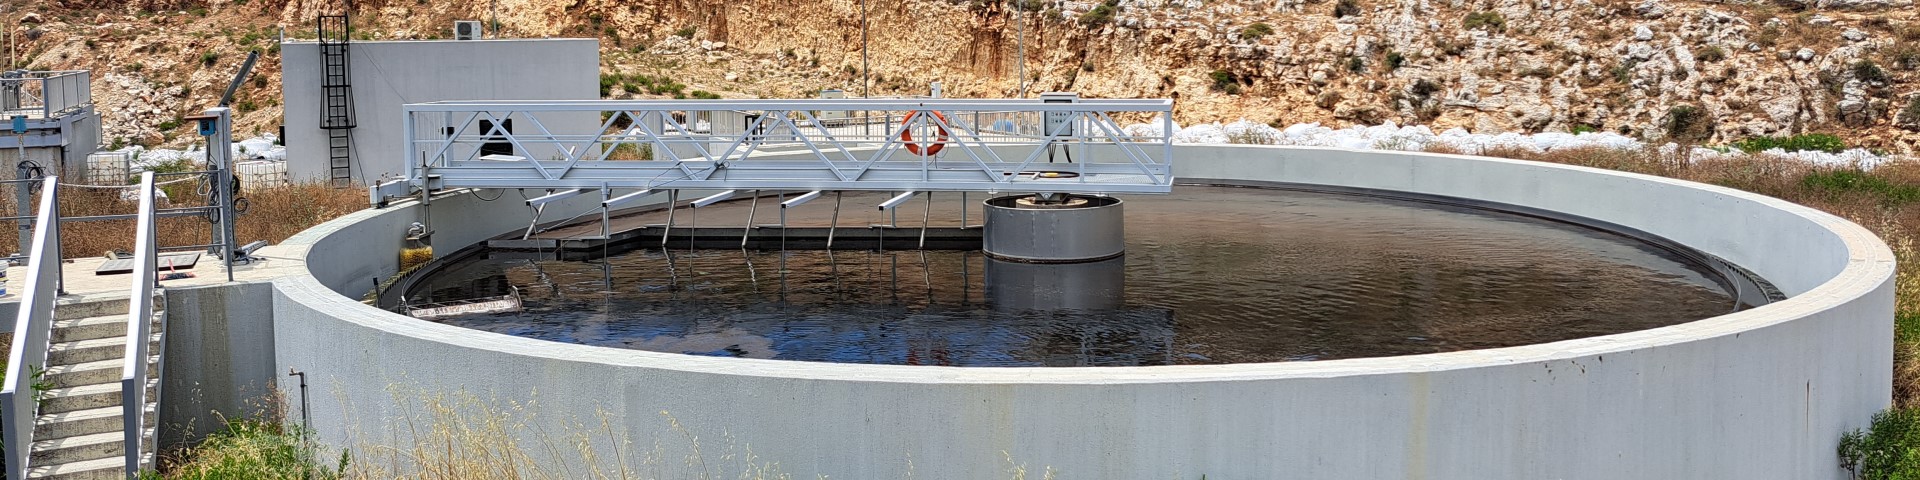 The round water basin of a wastewater treatment plant